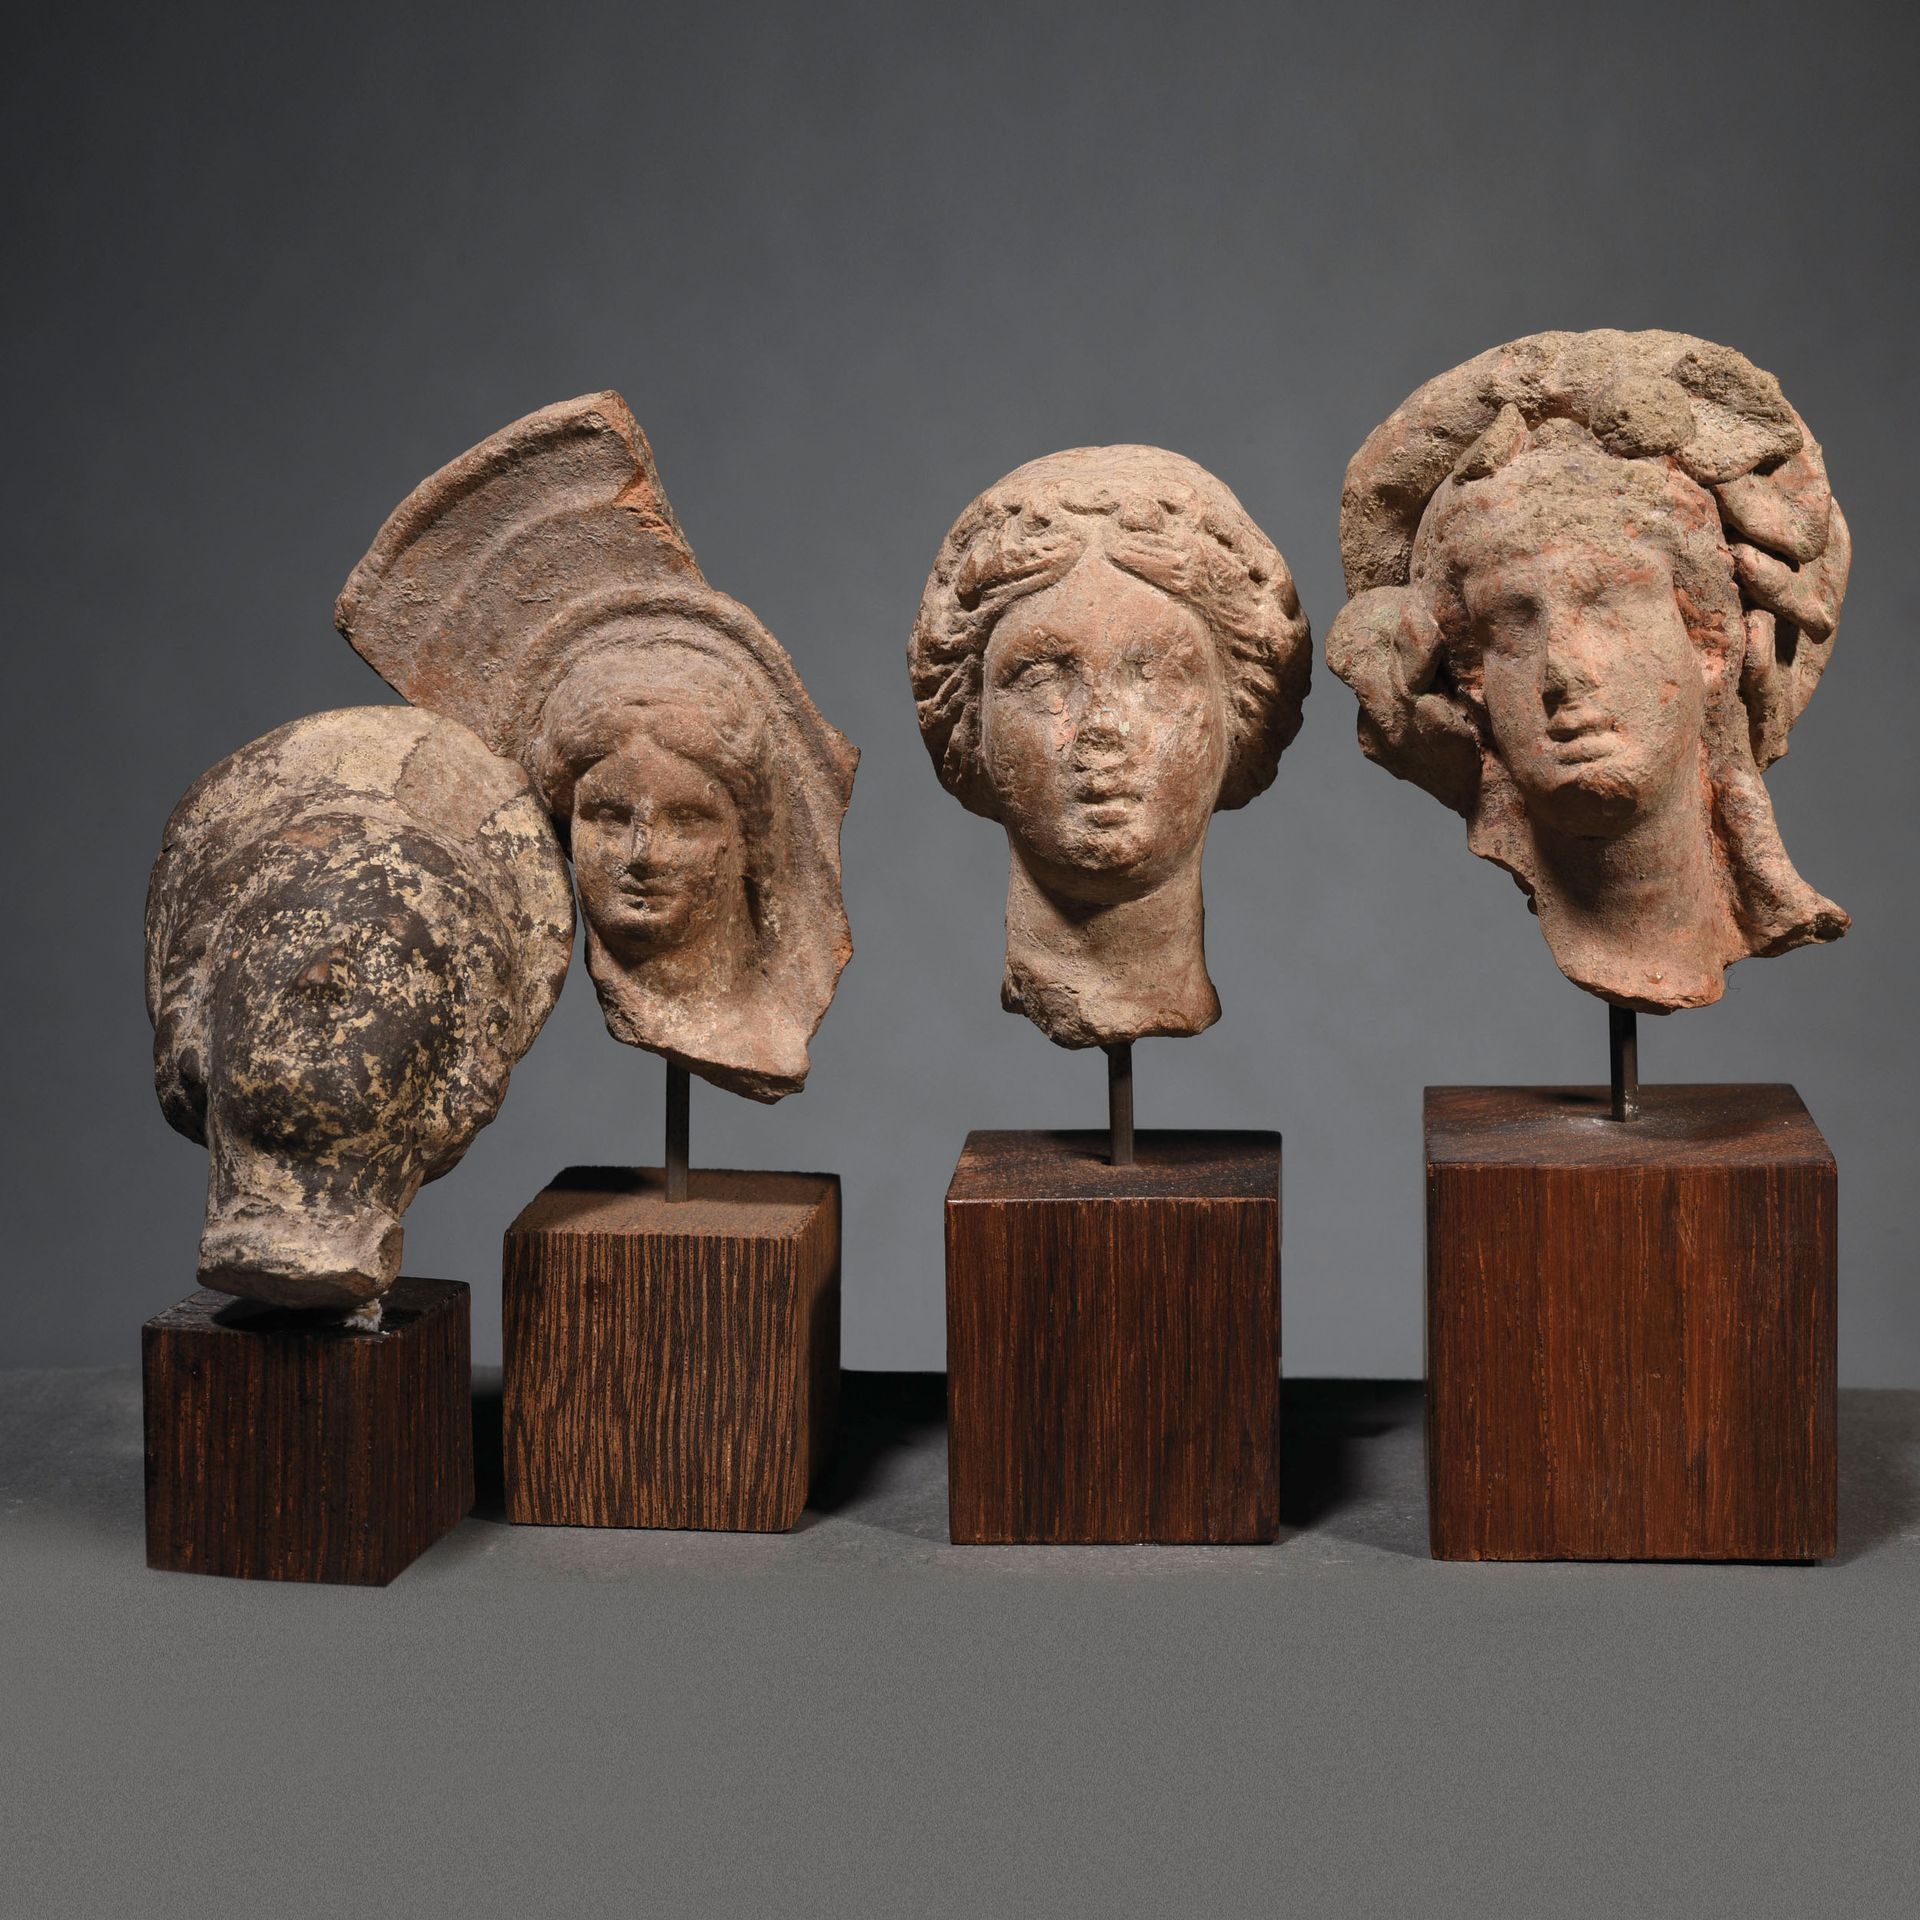 Null SET OF 4 EX-VOTO HEADS

Hellenistic art

In terracotta



Provenance

Forme&hellip;